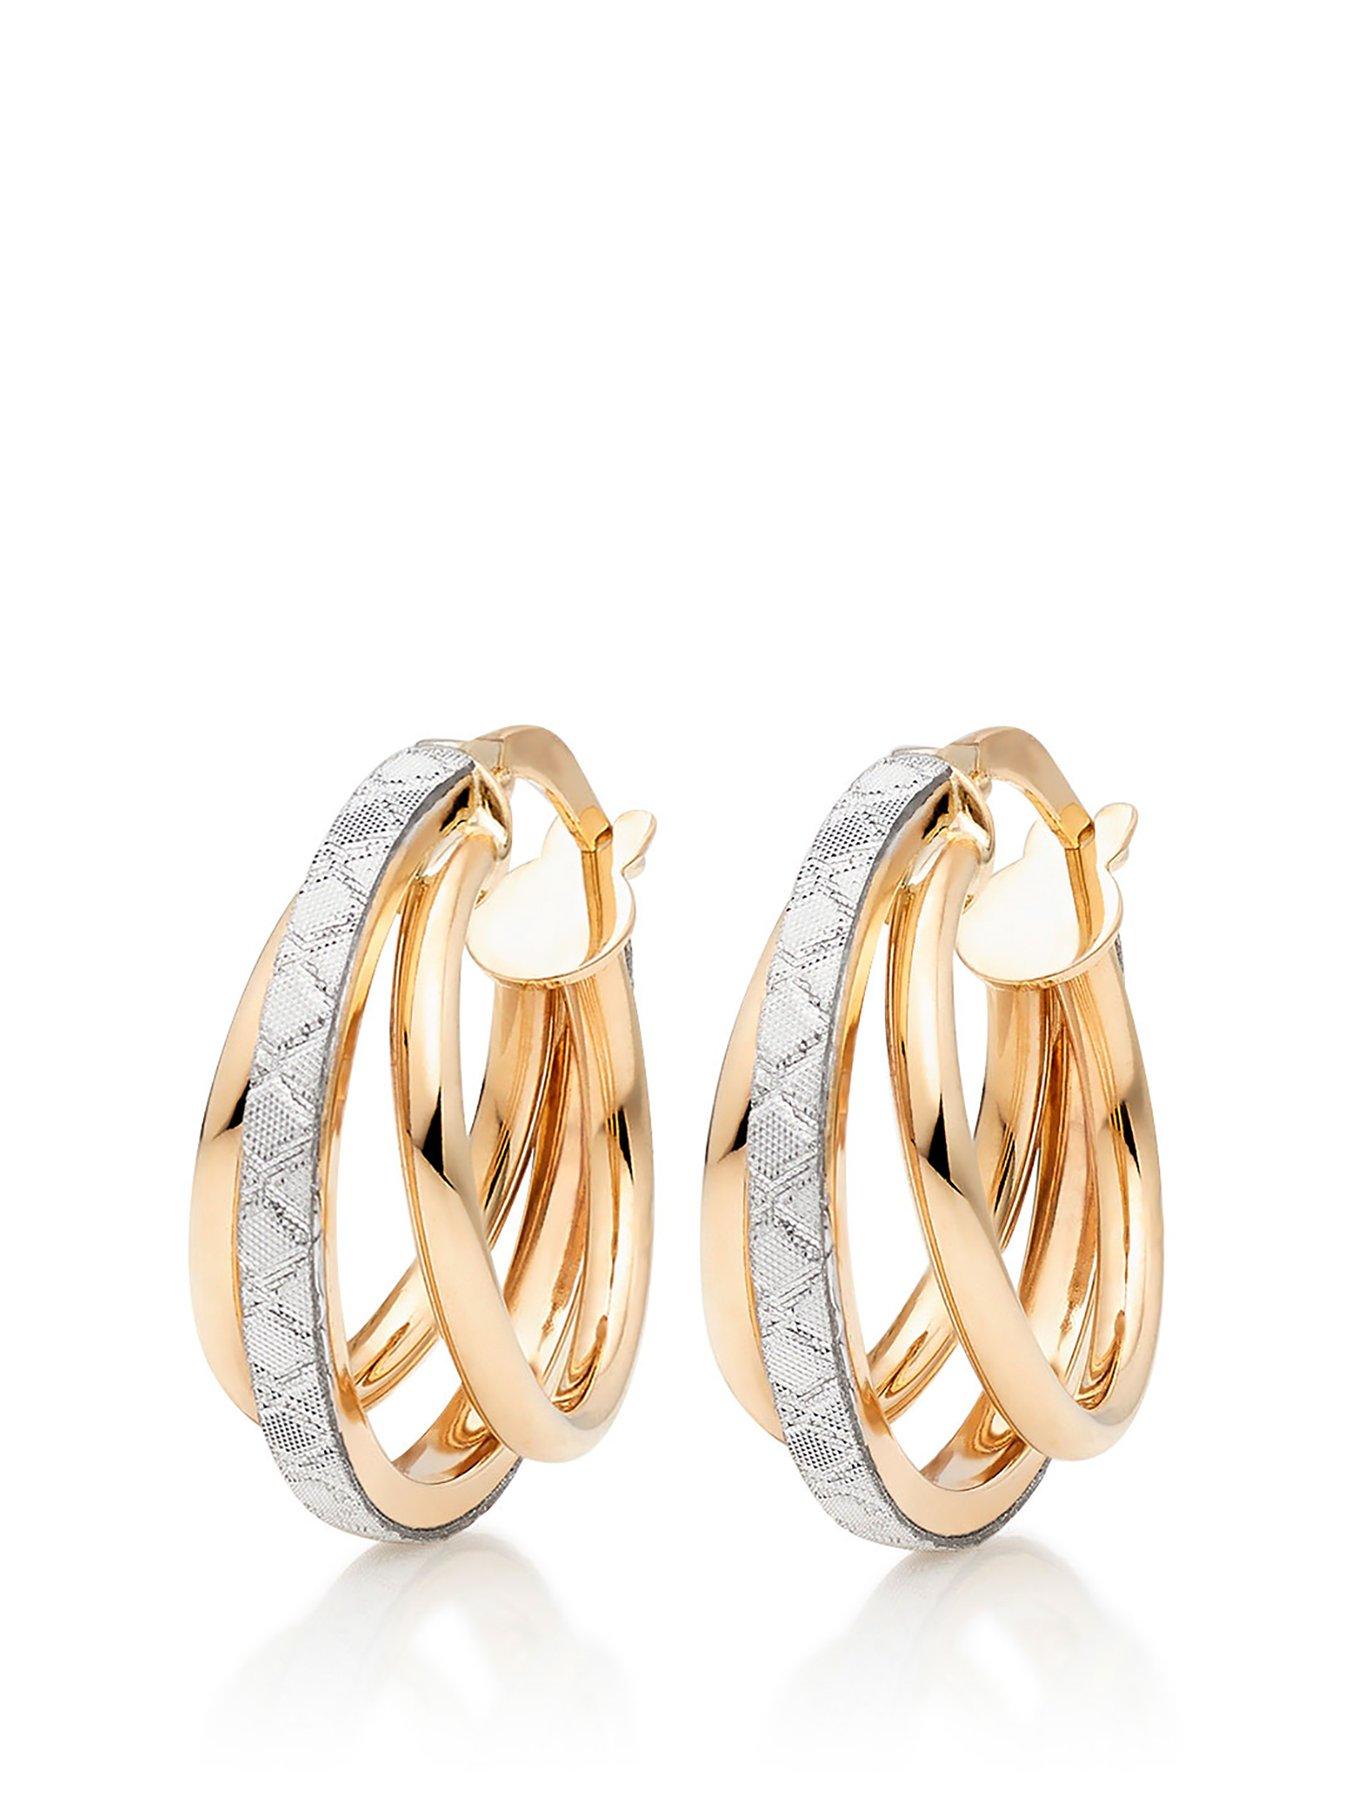 9ct gold OVAL EARRINGS FROM BEAVERBROOKS 